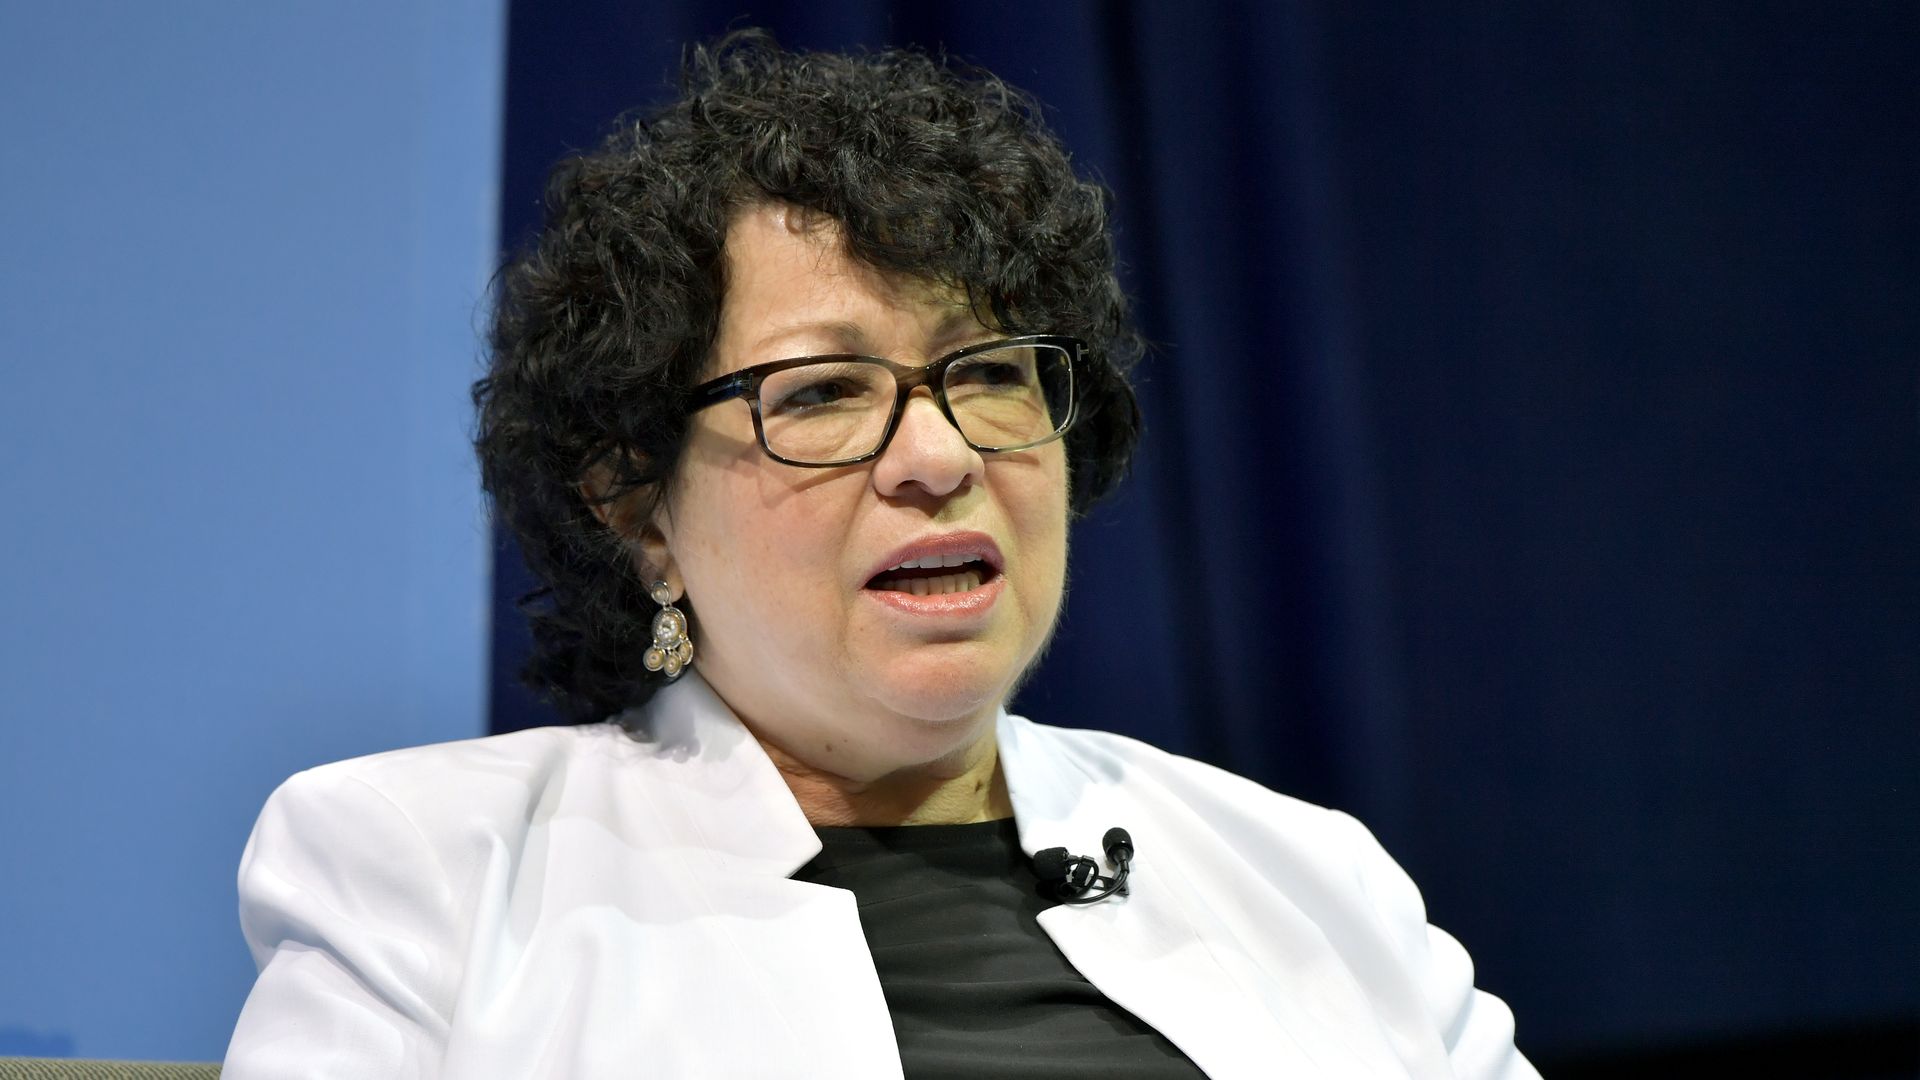 Photo of Sonia Sotomayor seated and speaking